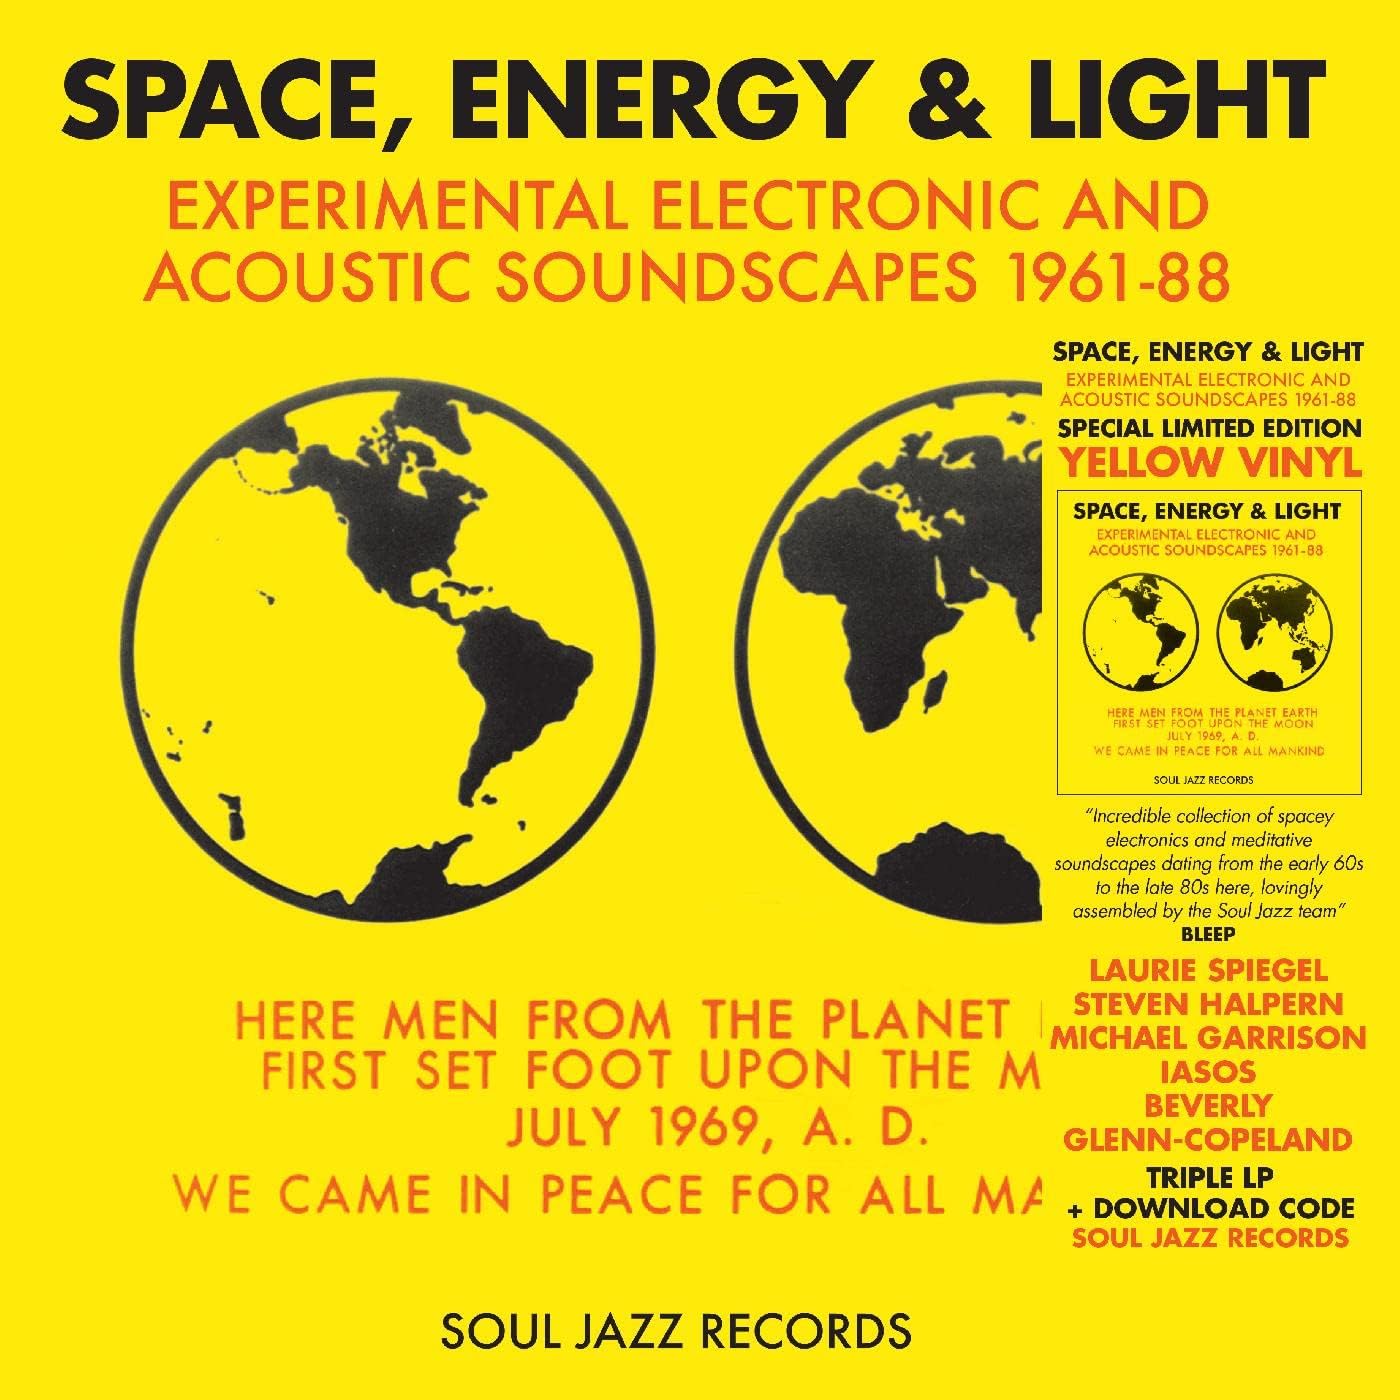 3LP - Space, Energy & Light: Experimental Electronic And Acoustic Soundscapes 1961-88